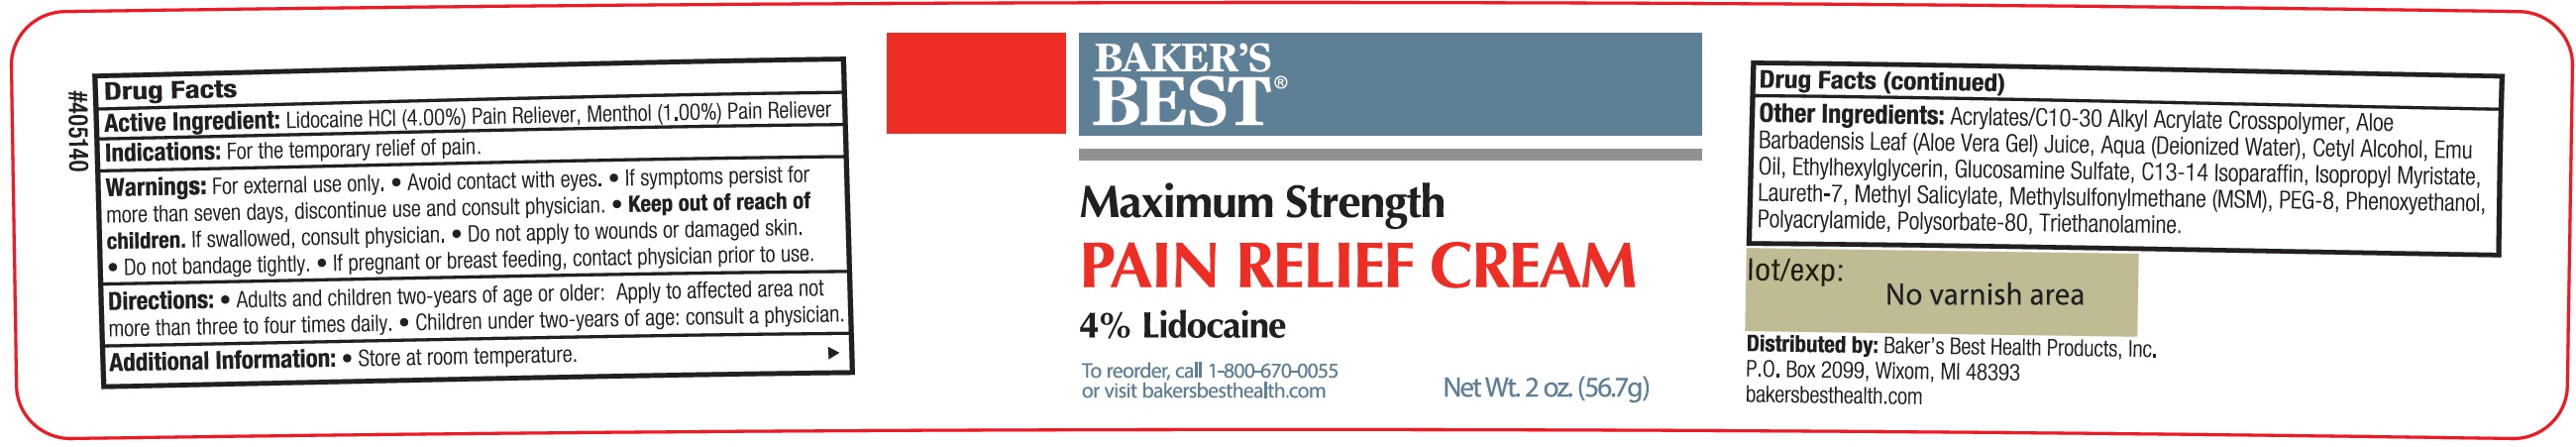 Is Baker's Best Maximum Strength Pain Relief | Lidocaine Hydrochloride, Menthol Cream safe while breastfeeding